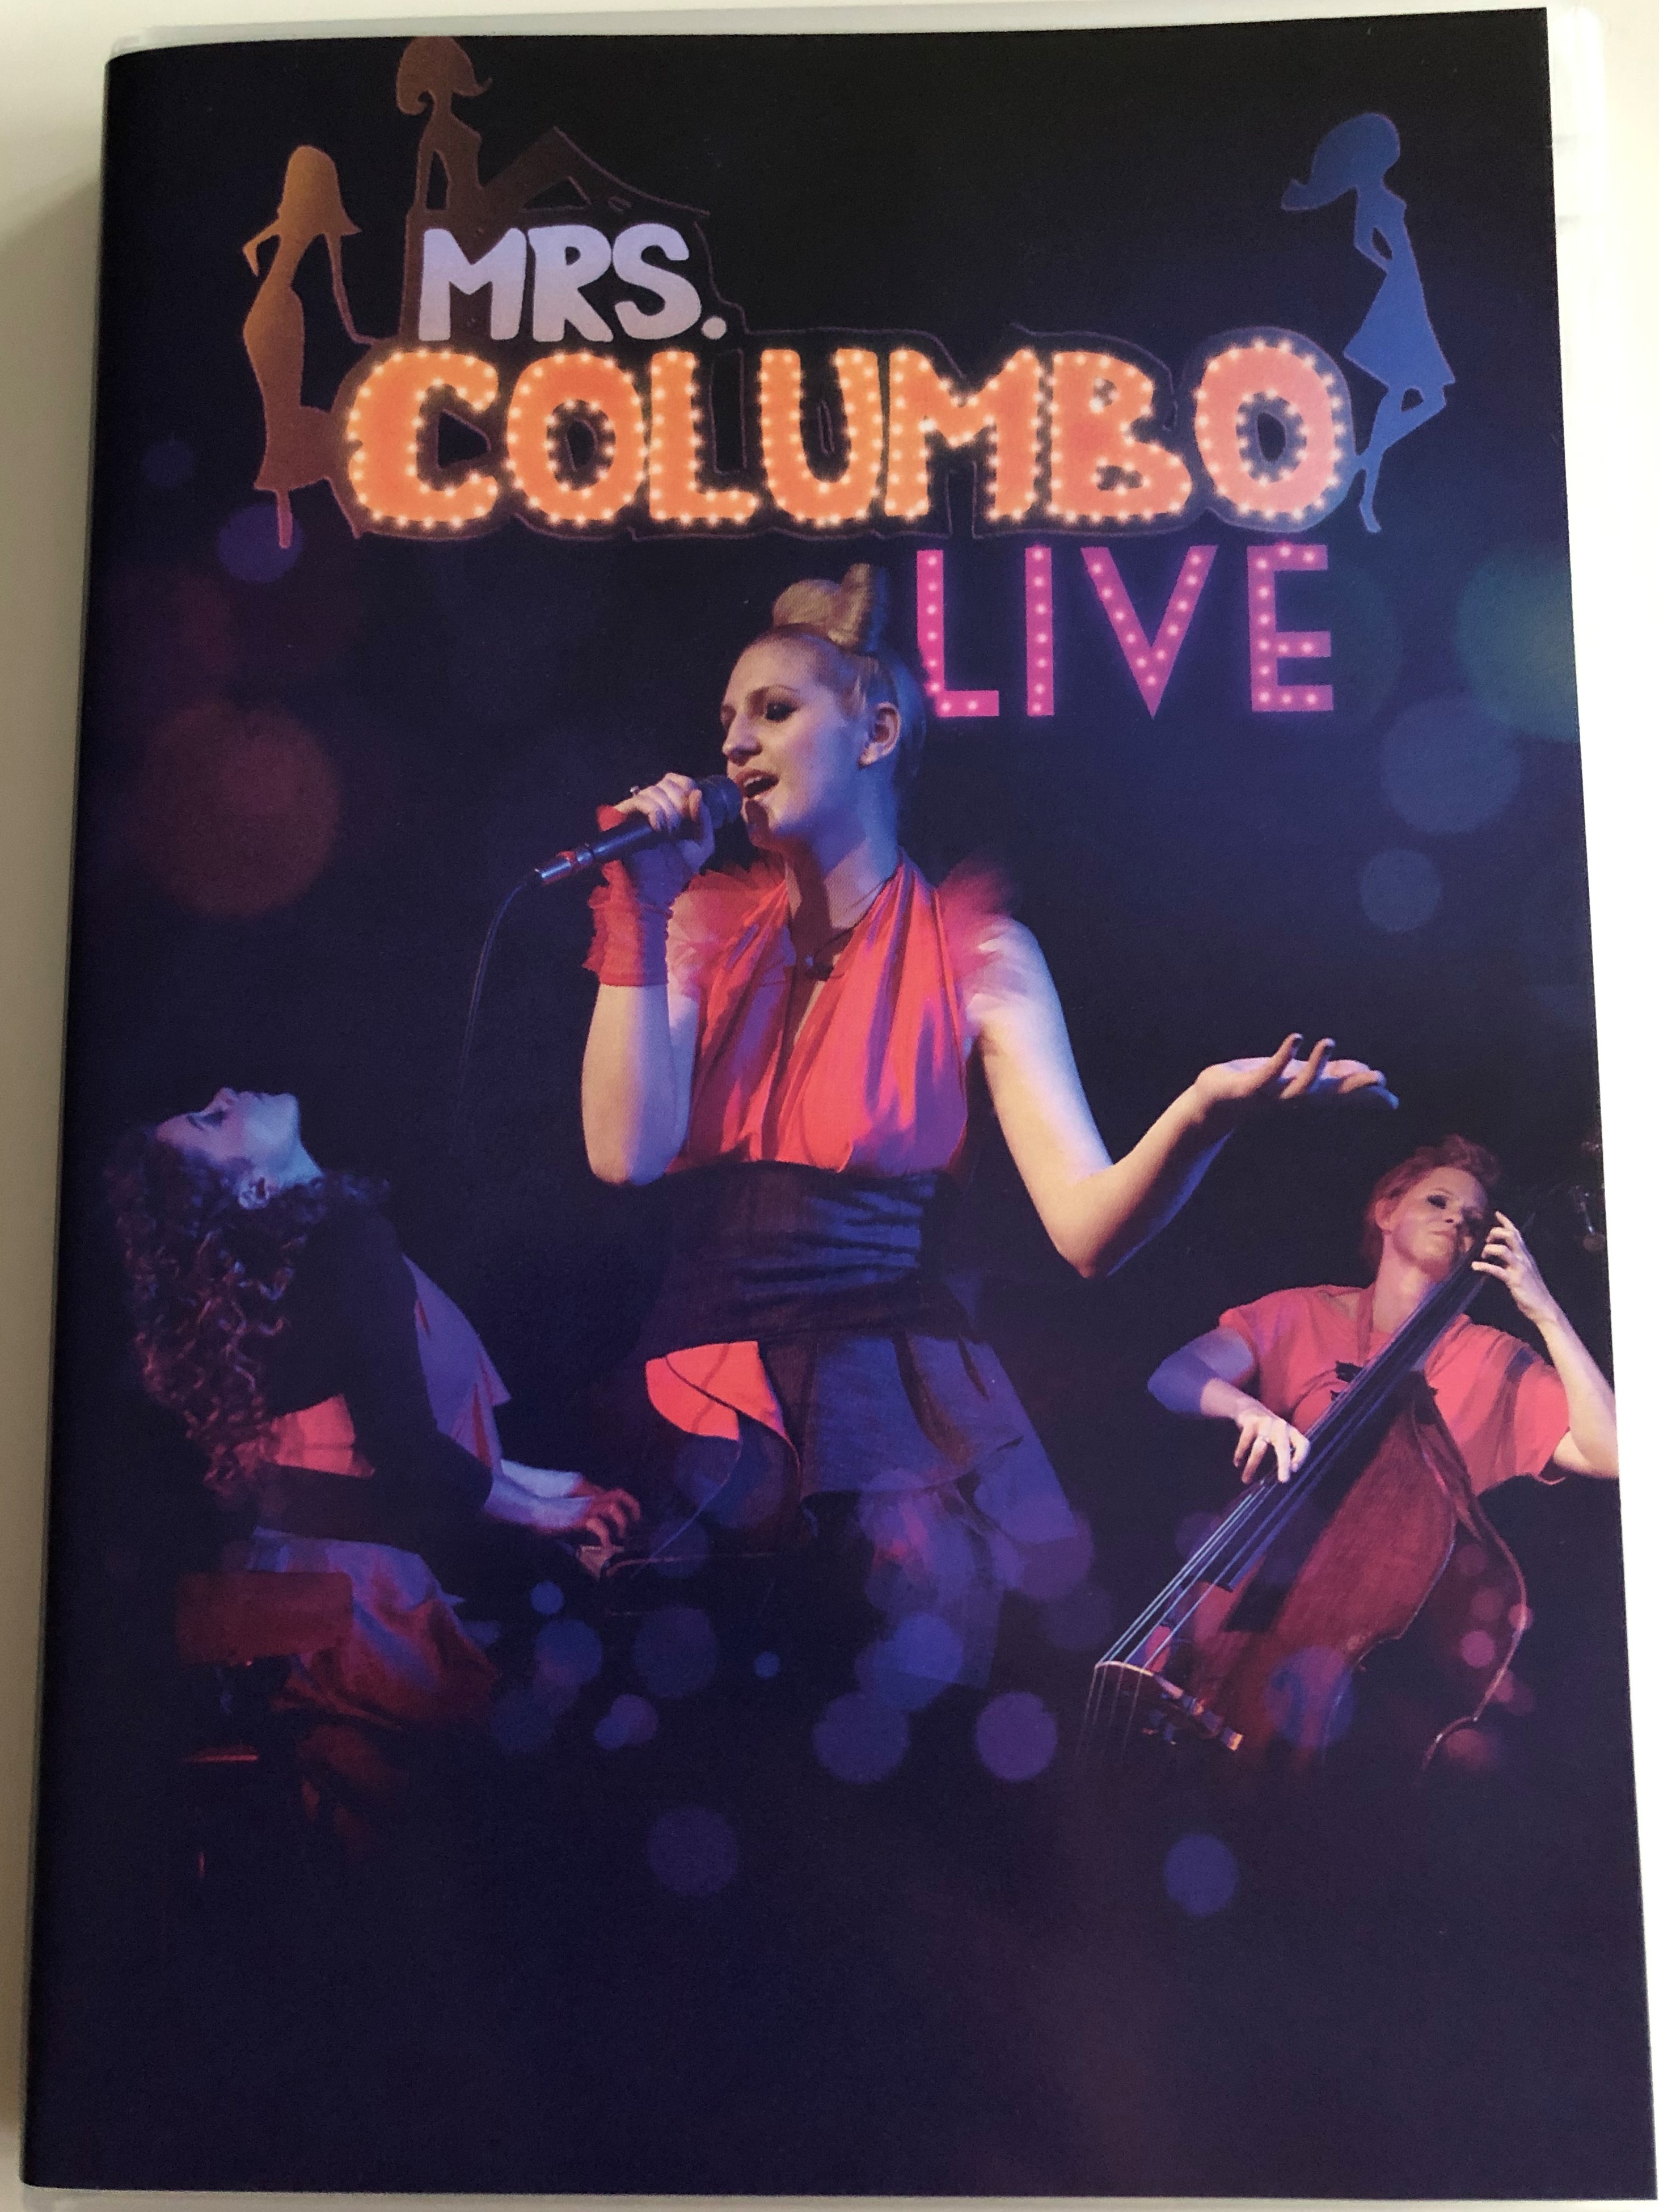 mrs.-columbo-live-dvd-2014-magneoton-don-t-worry-be-happy-love-is-the-answer-we-will-rock-you-sunny-side-of-jazz-1-.jpg